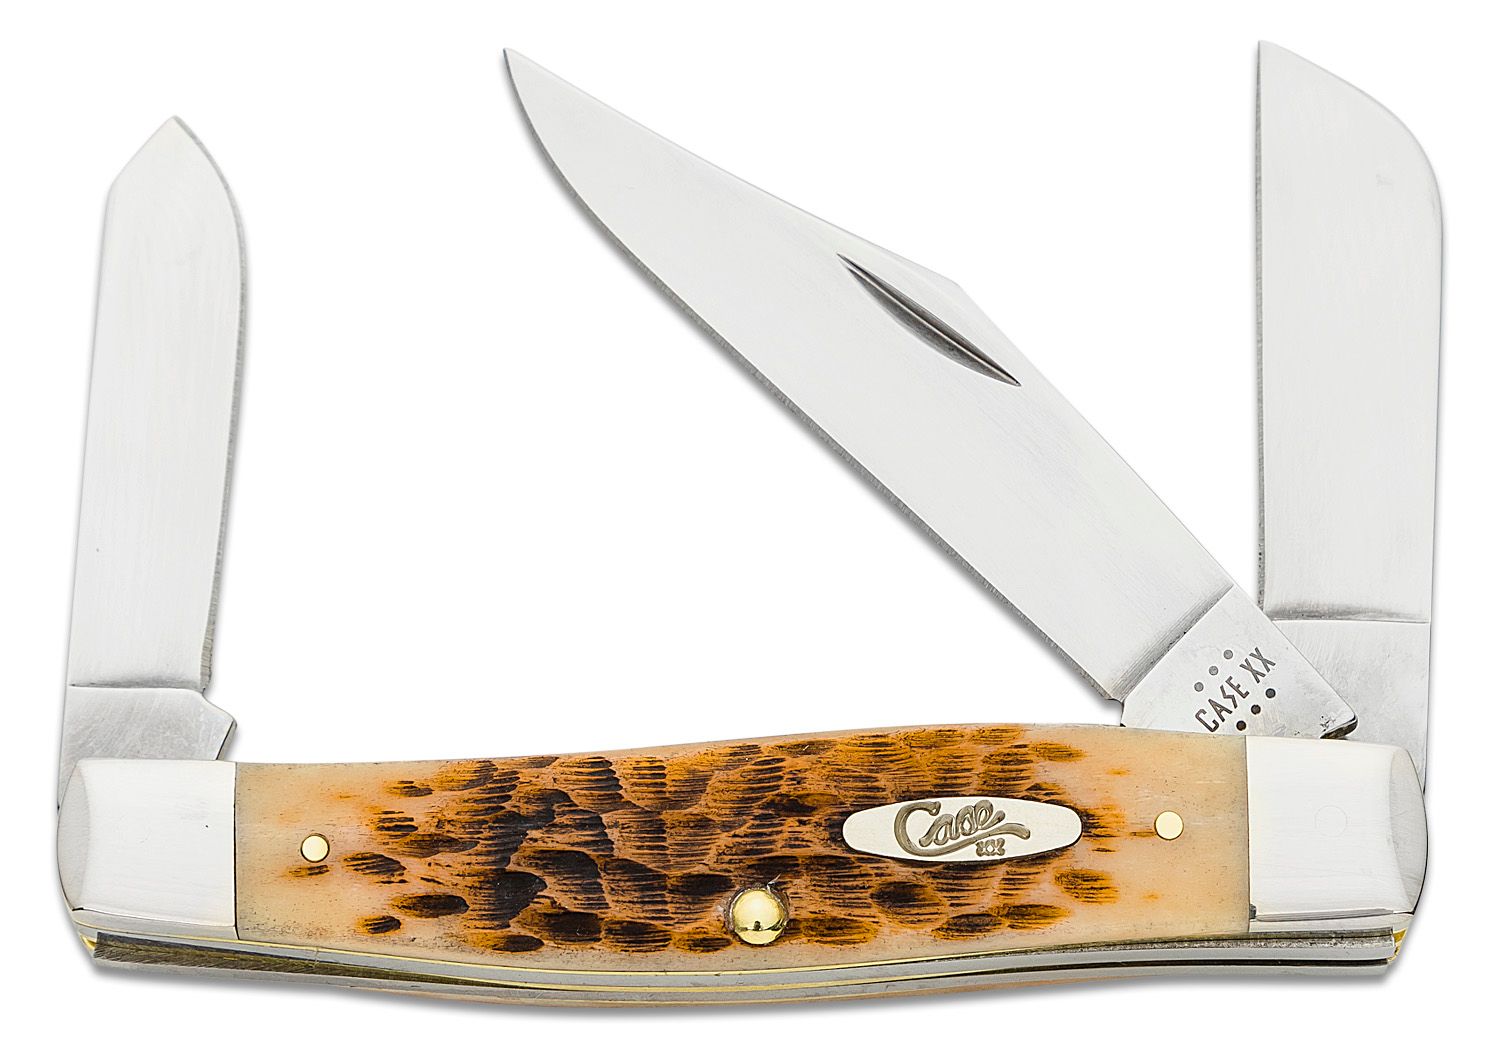 Case Peach Seed Jig Amber Bone Large Stockman Pocket Knife 4.25 Closed  (6375 SS) - KnifeCenter - 10724